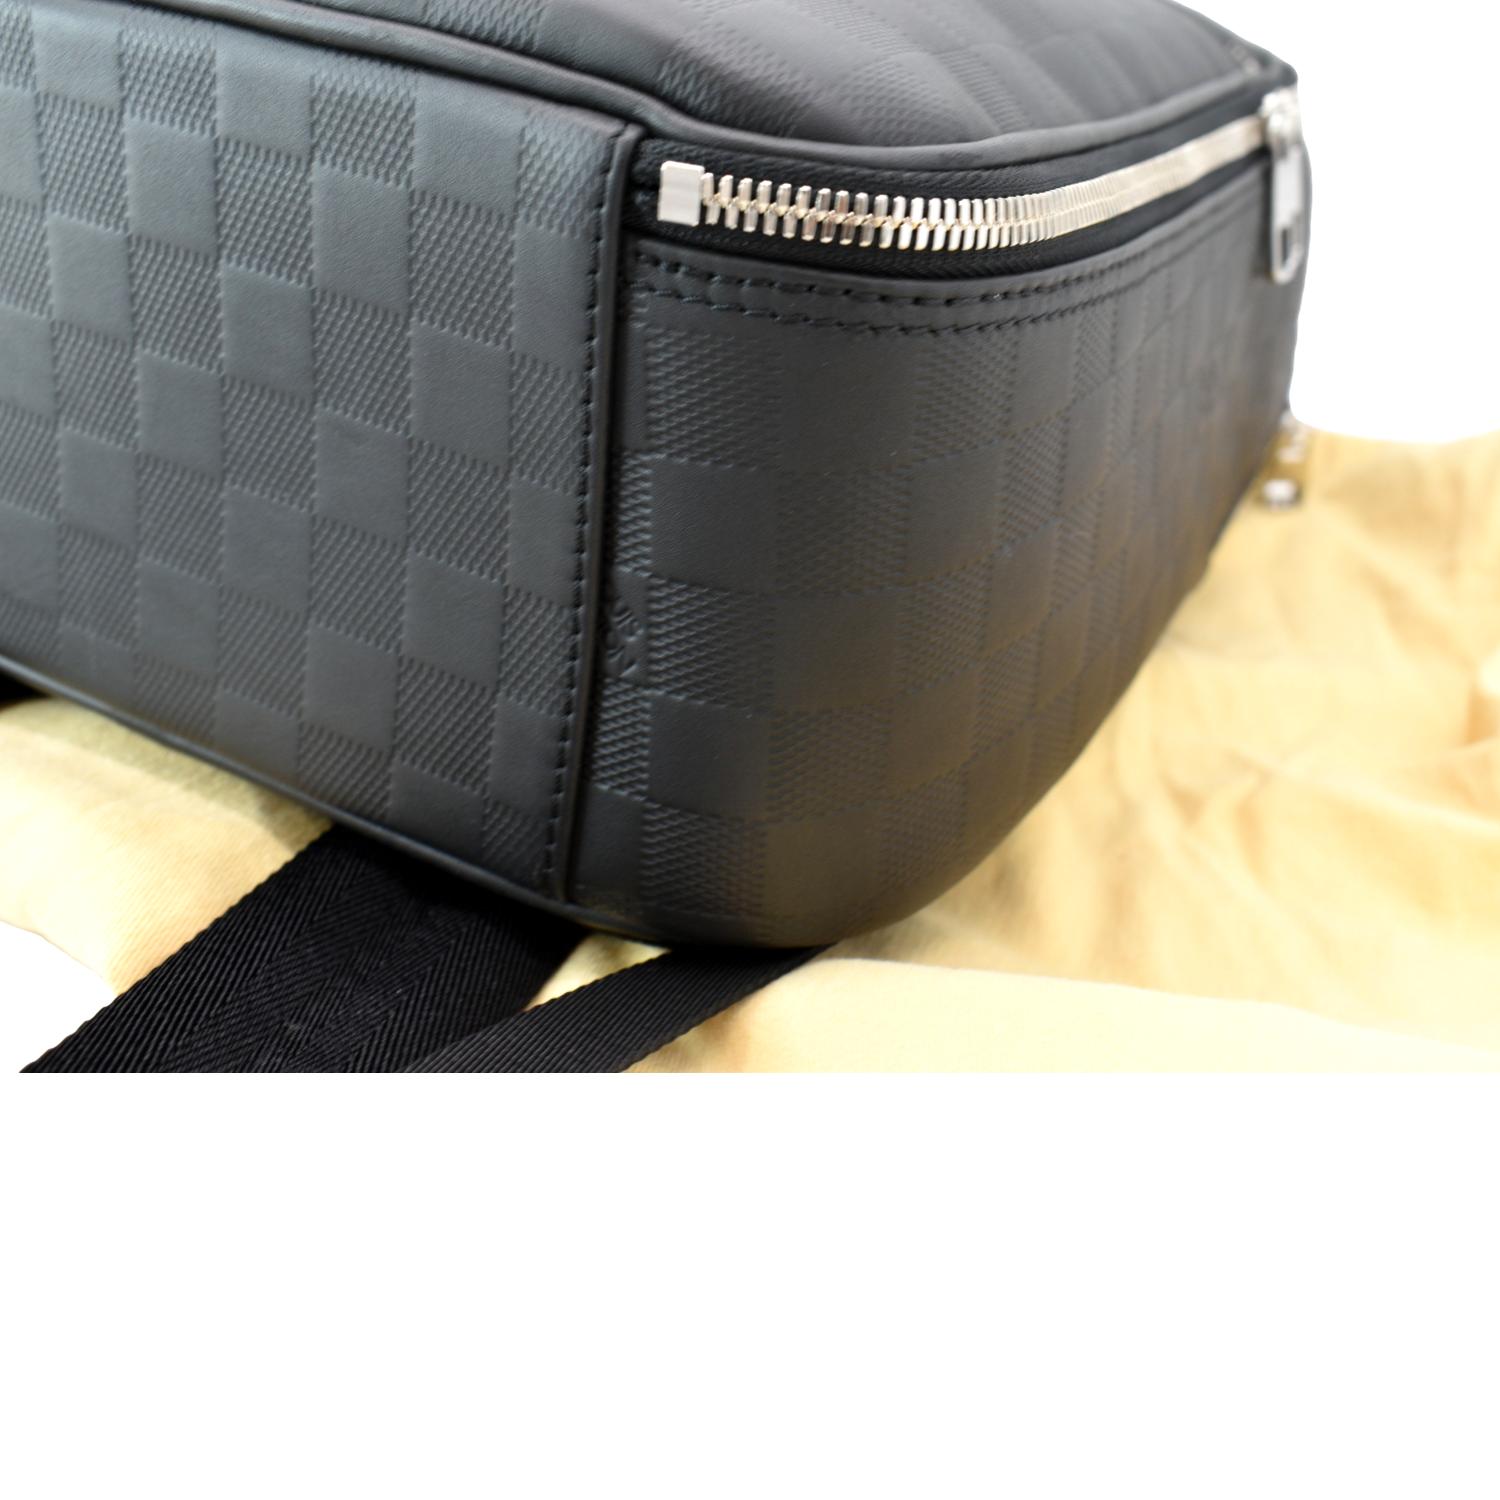 Louis Vuitton Black Damier Infini Leather Michael Backpack at 1stDibs